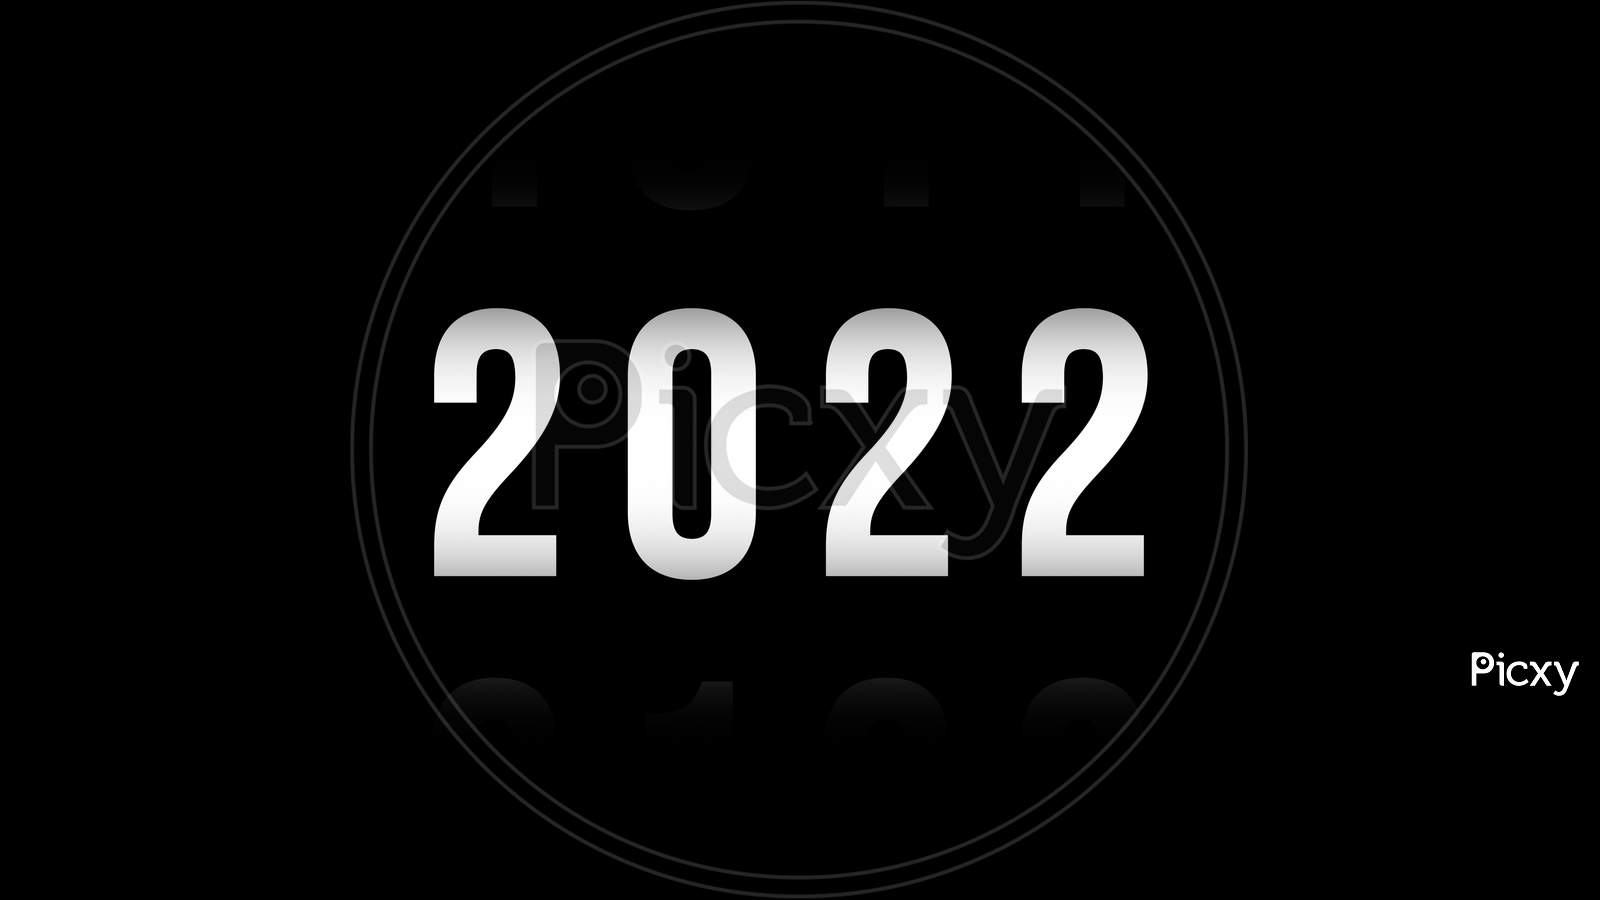 Image Of 2022 New Year Number On Black Isolated Background. Font Background And Typography Concept. ZZ025886 Picxy